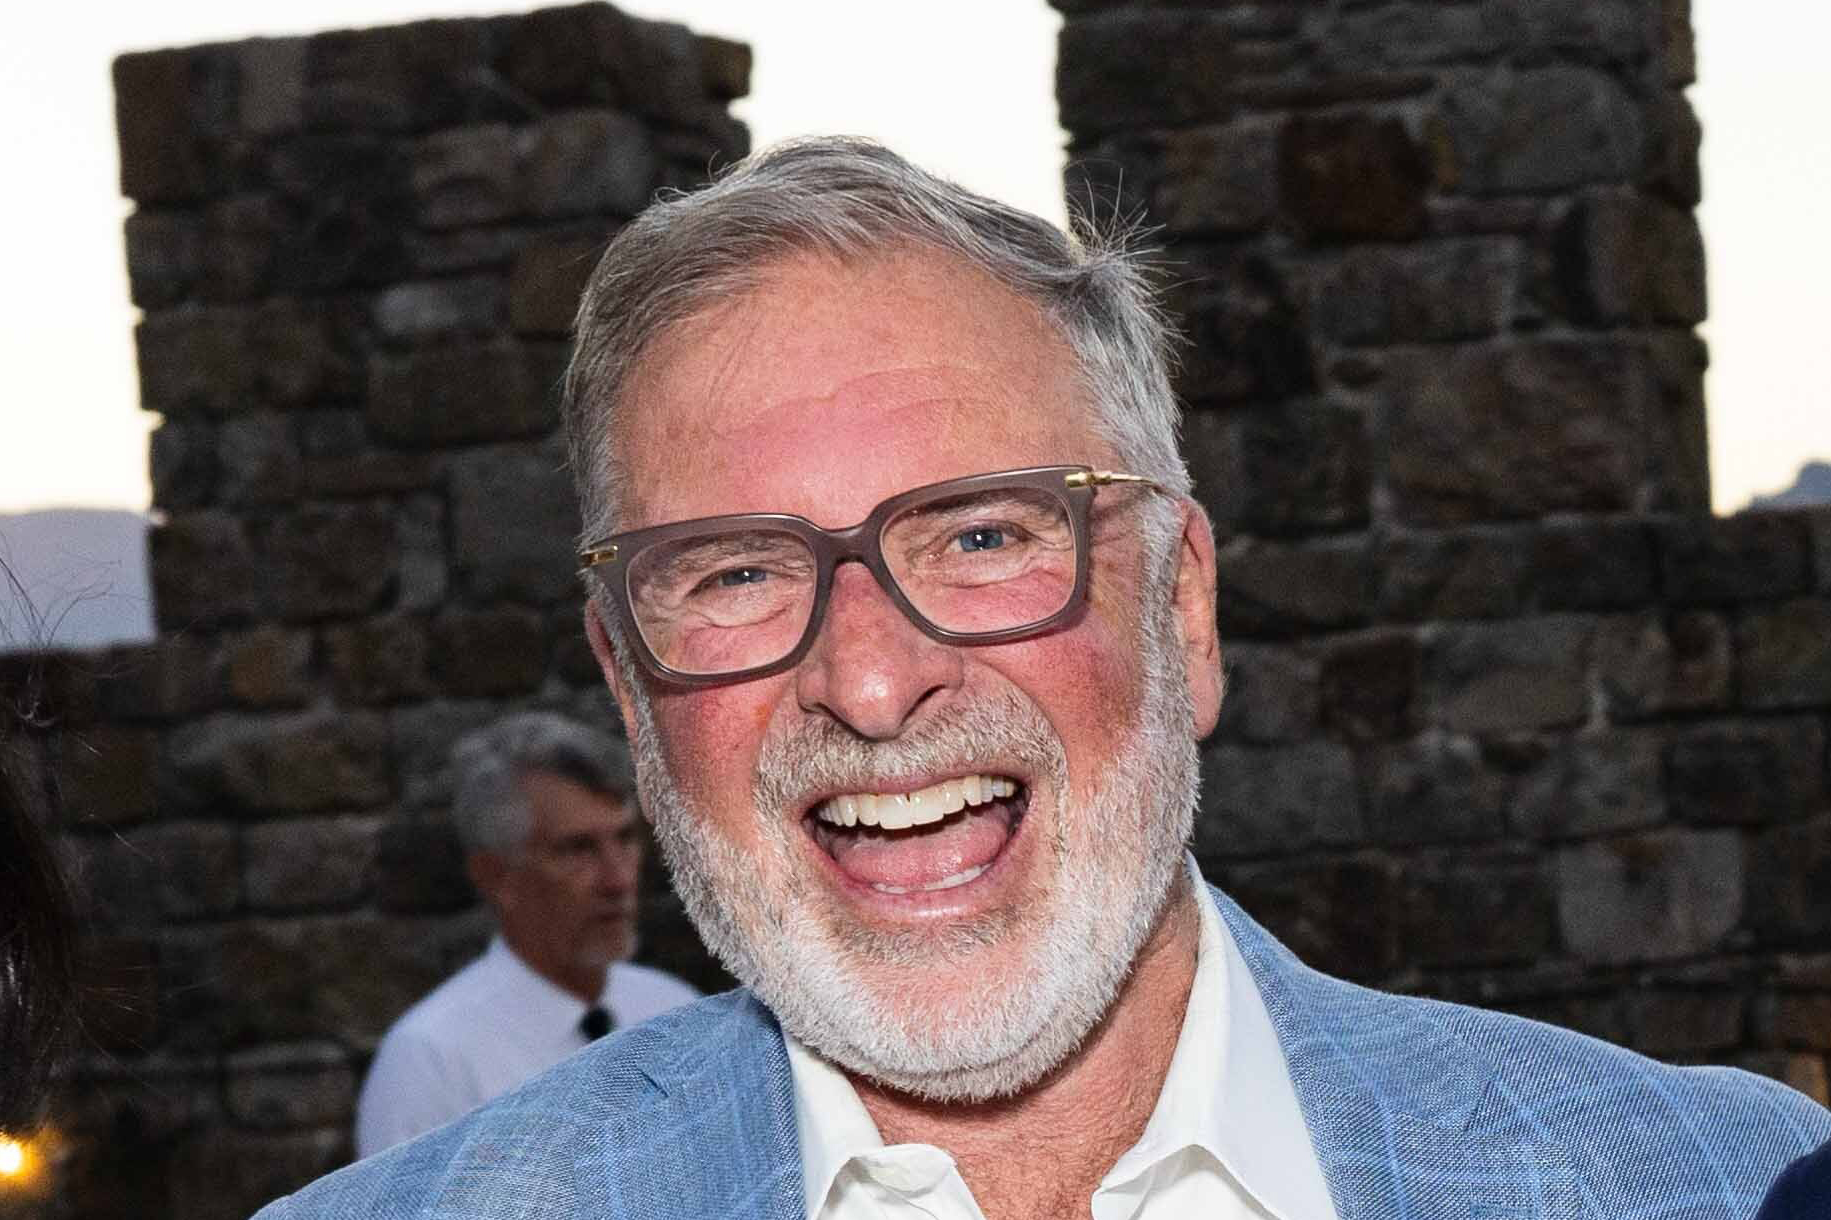 A man with a thin beard, while wearing a blue sport coat laughs out loud with brown stone in the background.